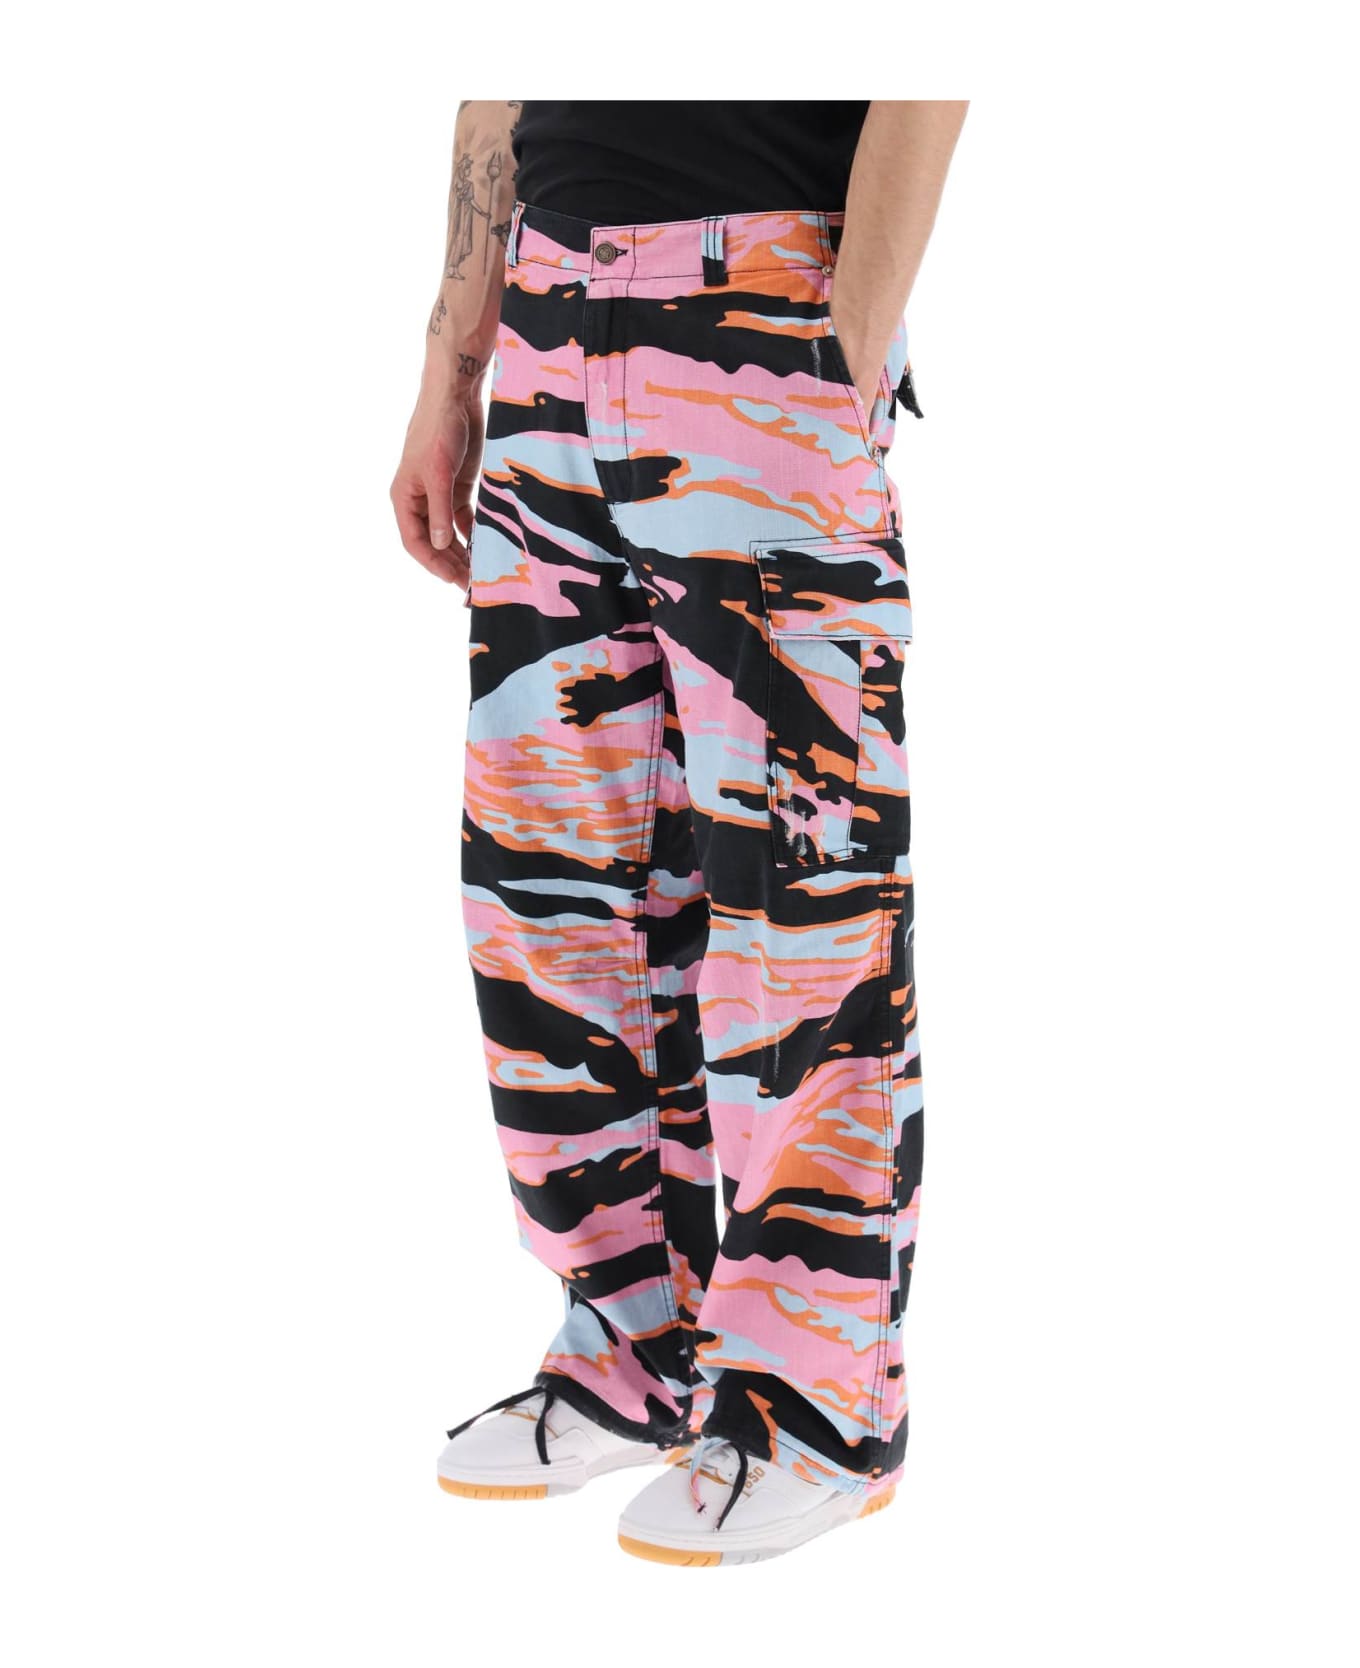 ERL Camouflage Cargo Pants - ERL PINK RAVE CAMO 2 (Black)